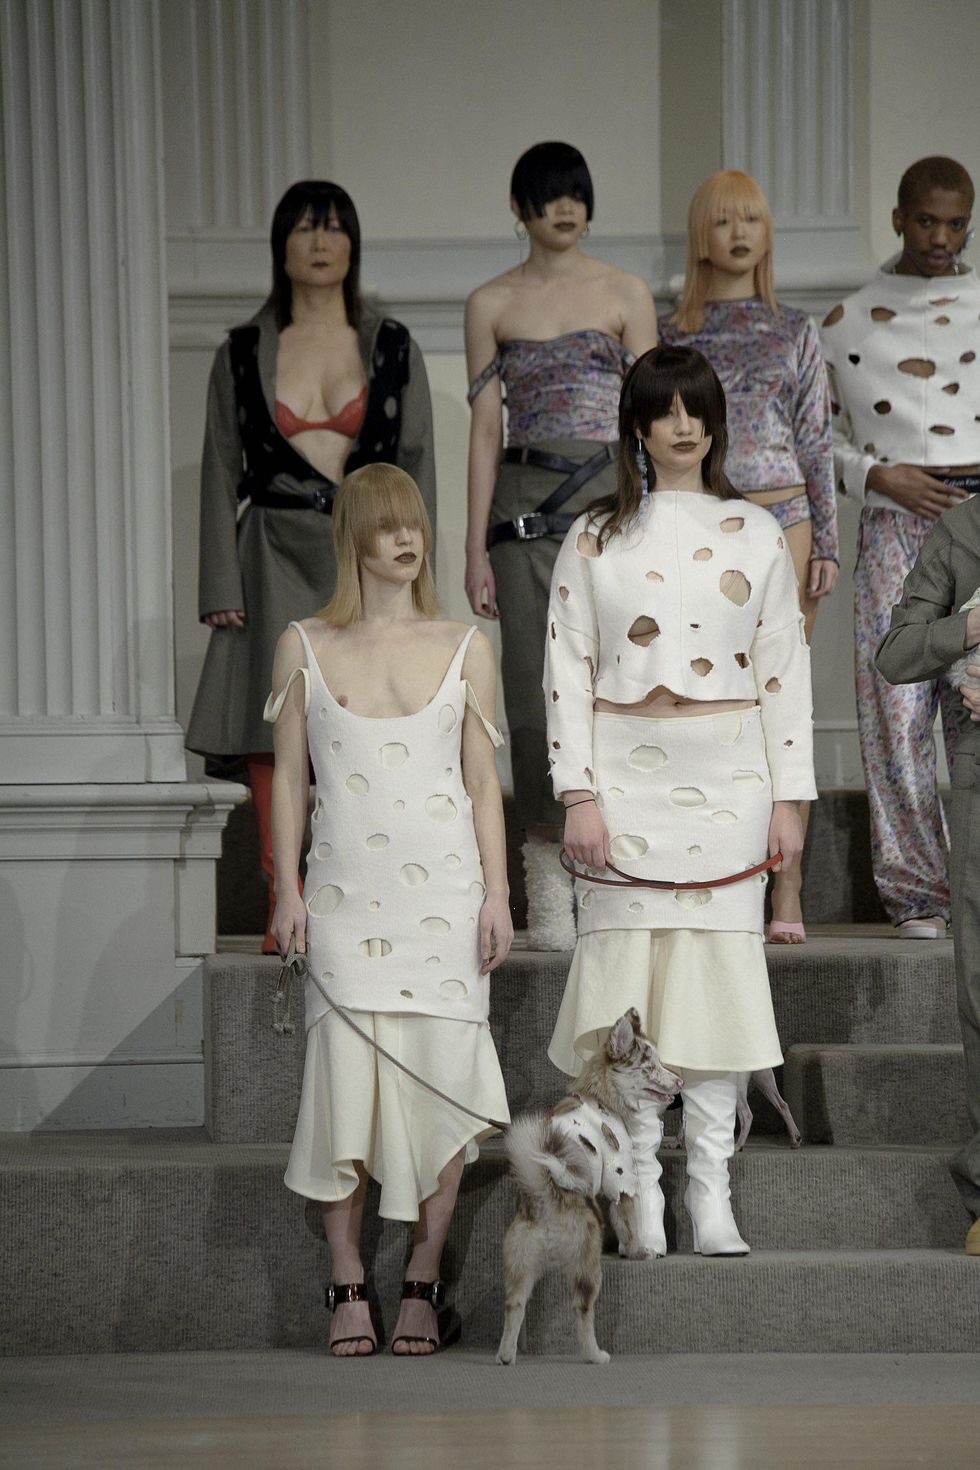 Gauntlett Cheng Let Their Catwalk Go To The Dogs